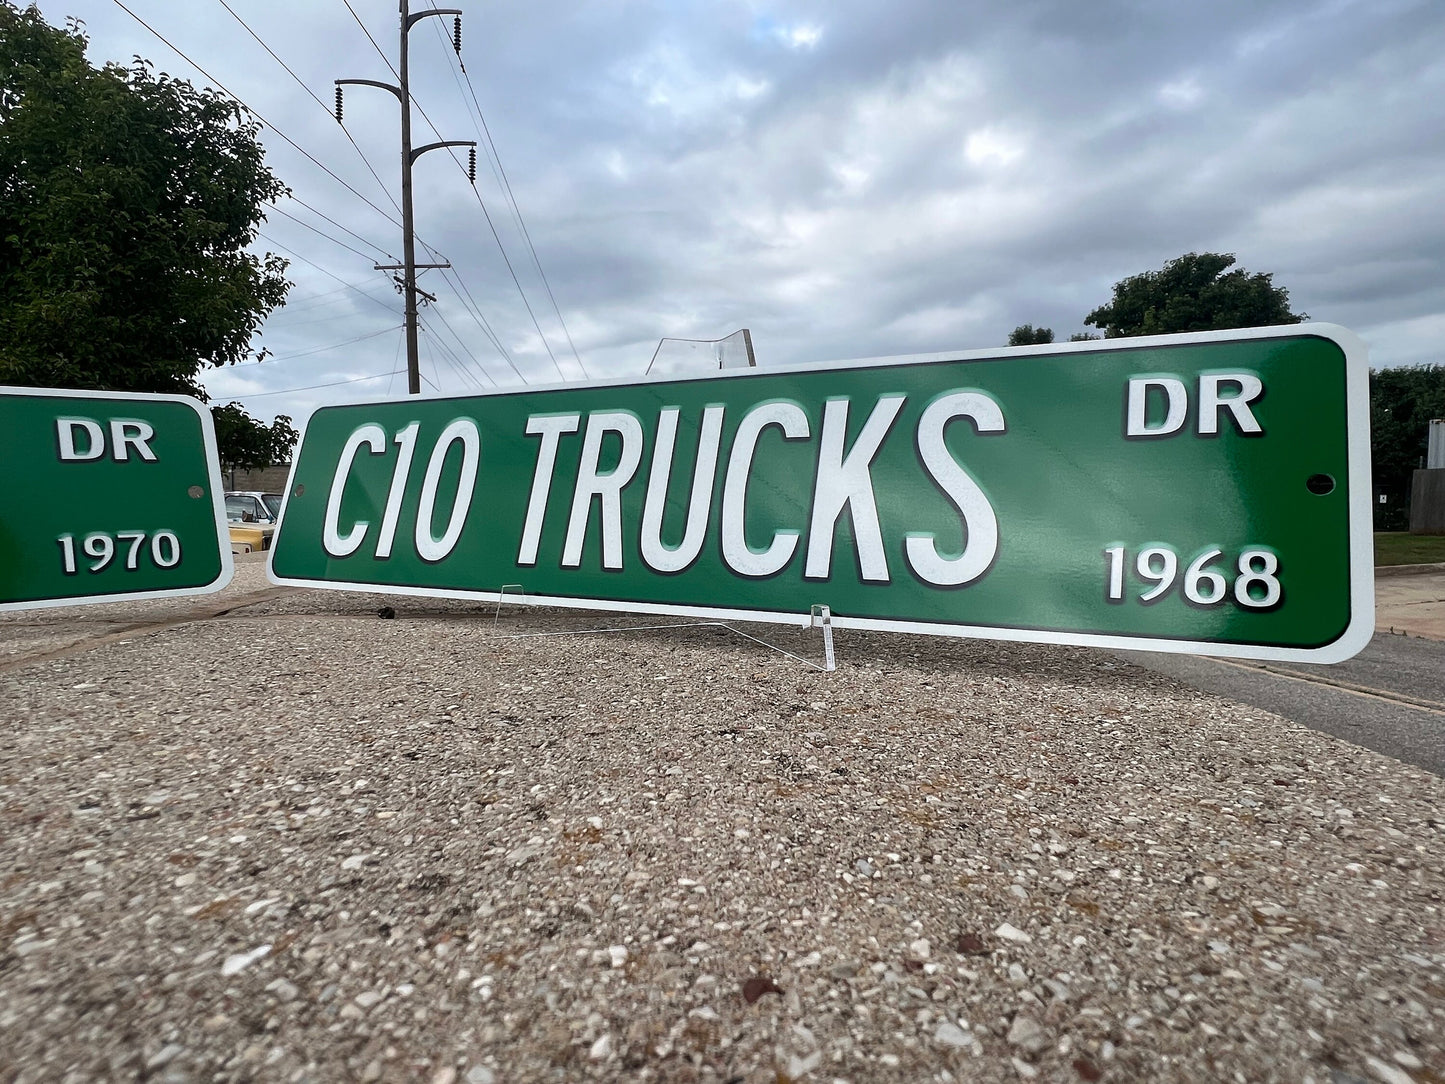 Custom Chevy GMC C10 Trucks Street Sign - Choose Your Year & Postal Abbreviation - 18x4 Inches - Perfect for Chevy Man Cave Garage